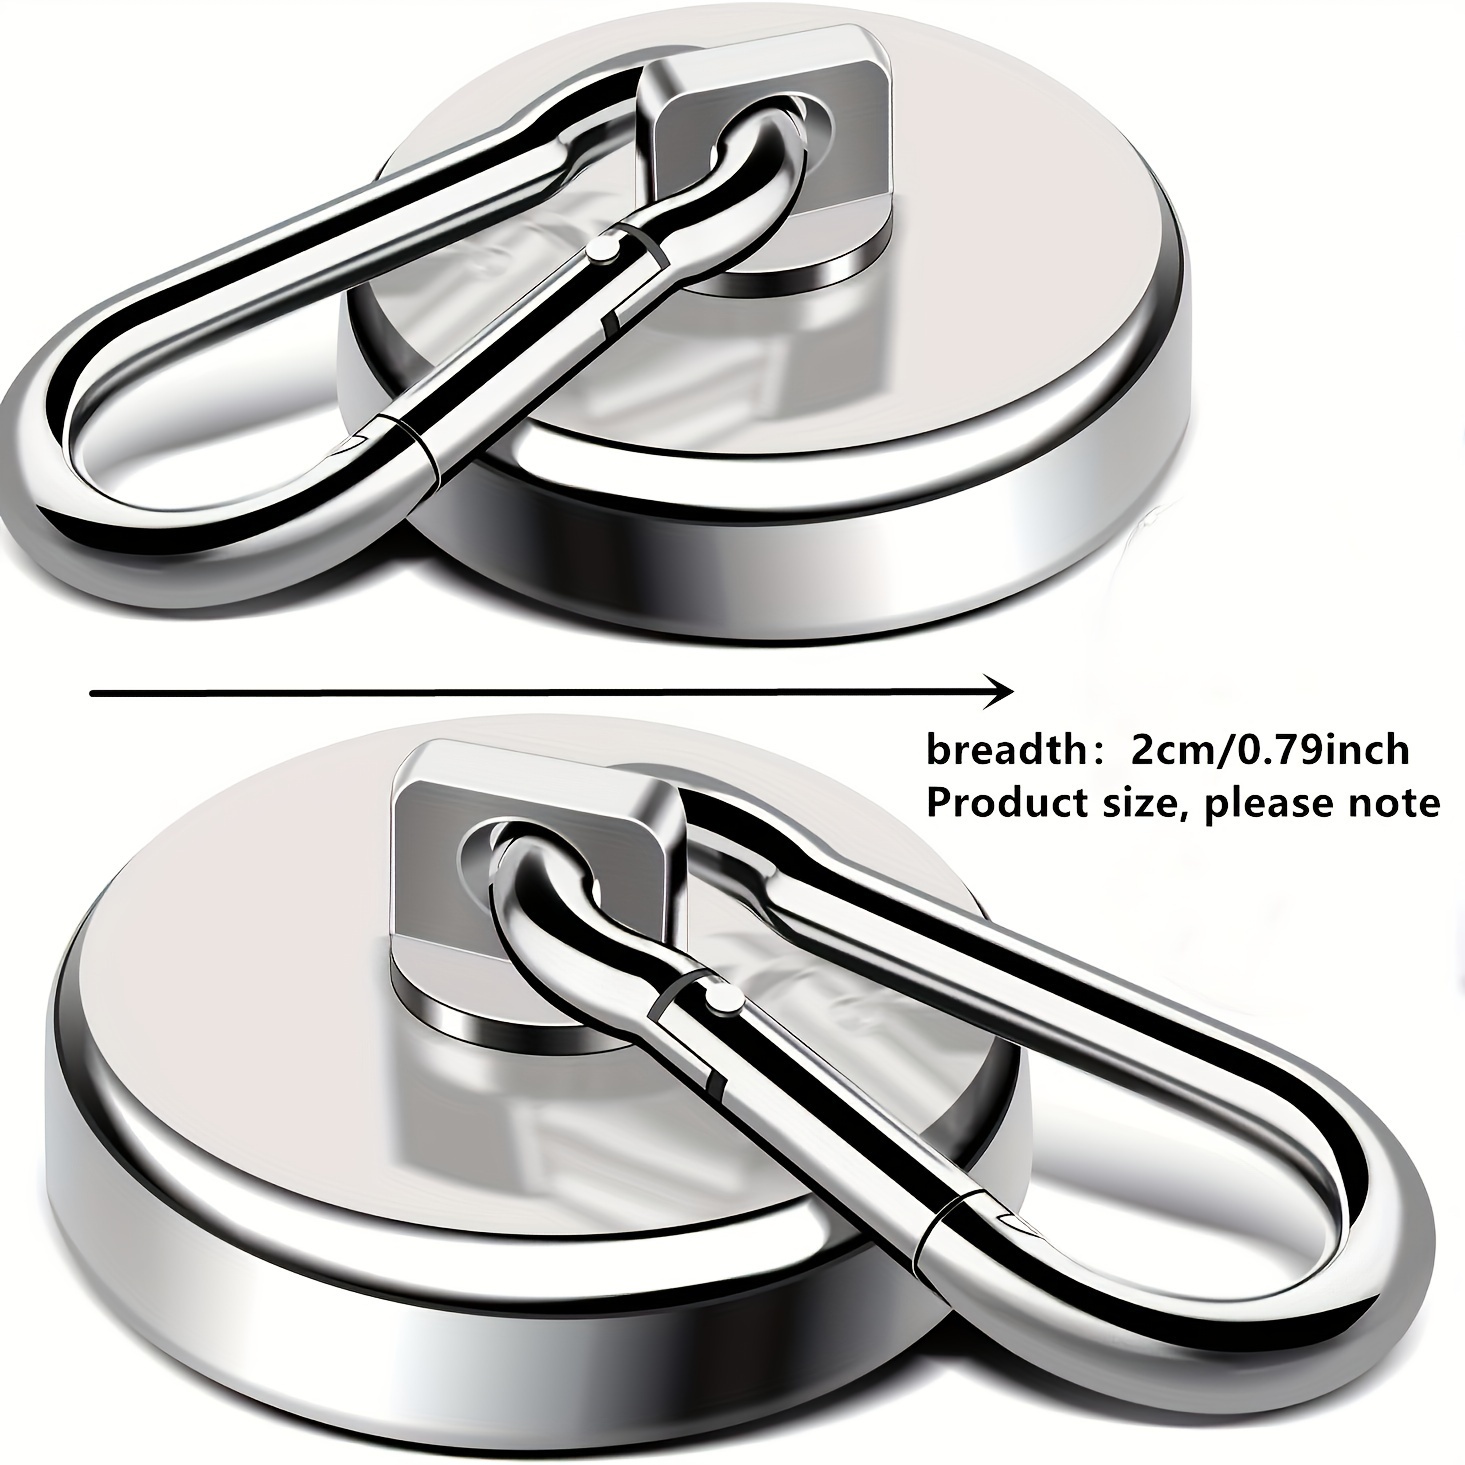 

2-piece Heavy Duty Magnetic Hooks With Carabiner - 100lbs Neodymium Magnets, Swivel Design For Bbq, Kitchen, Garage & Cruise Use